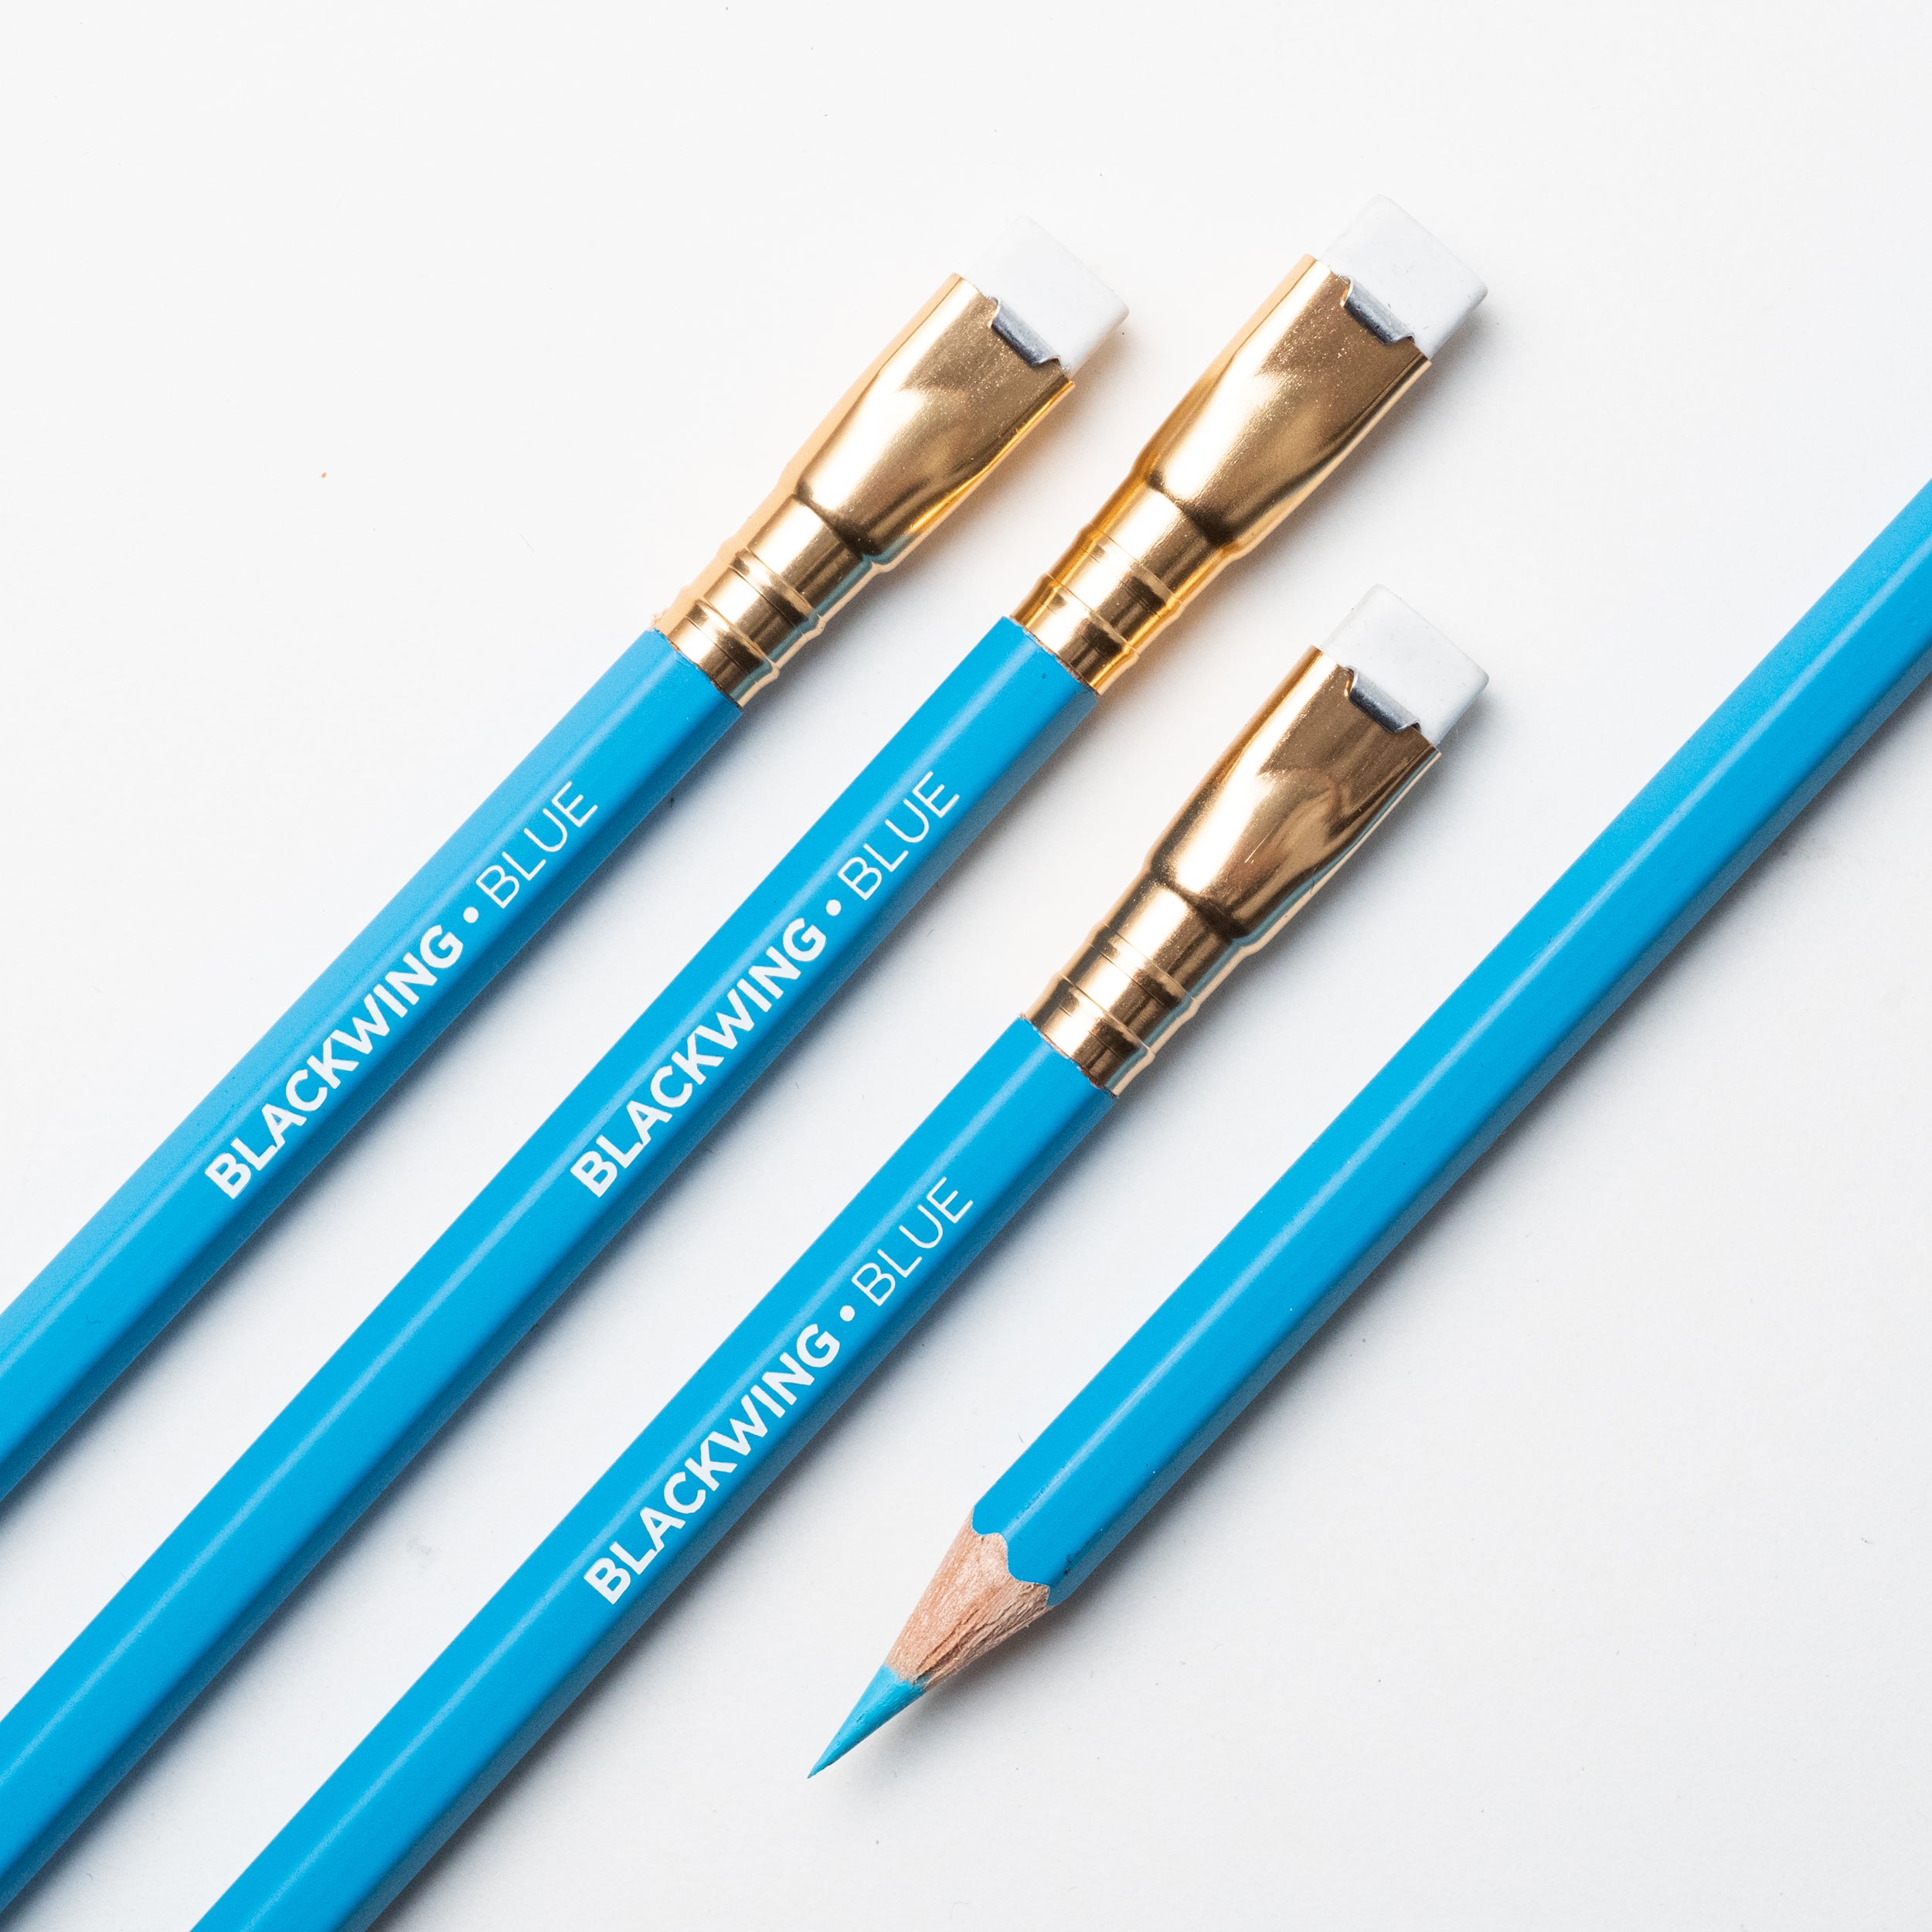 A group of blue pencils, including a Blackwing Blue pencil with a non-photo blue core.